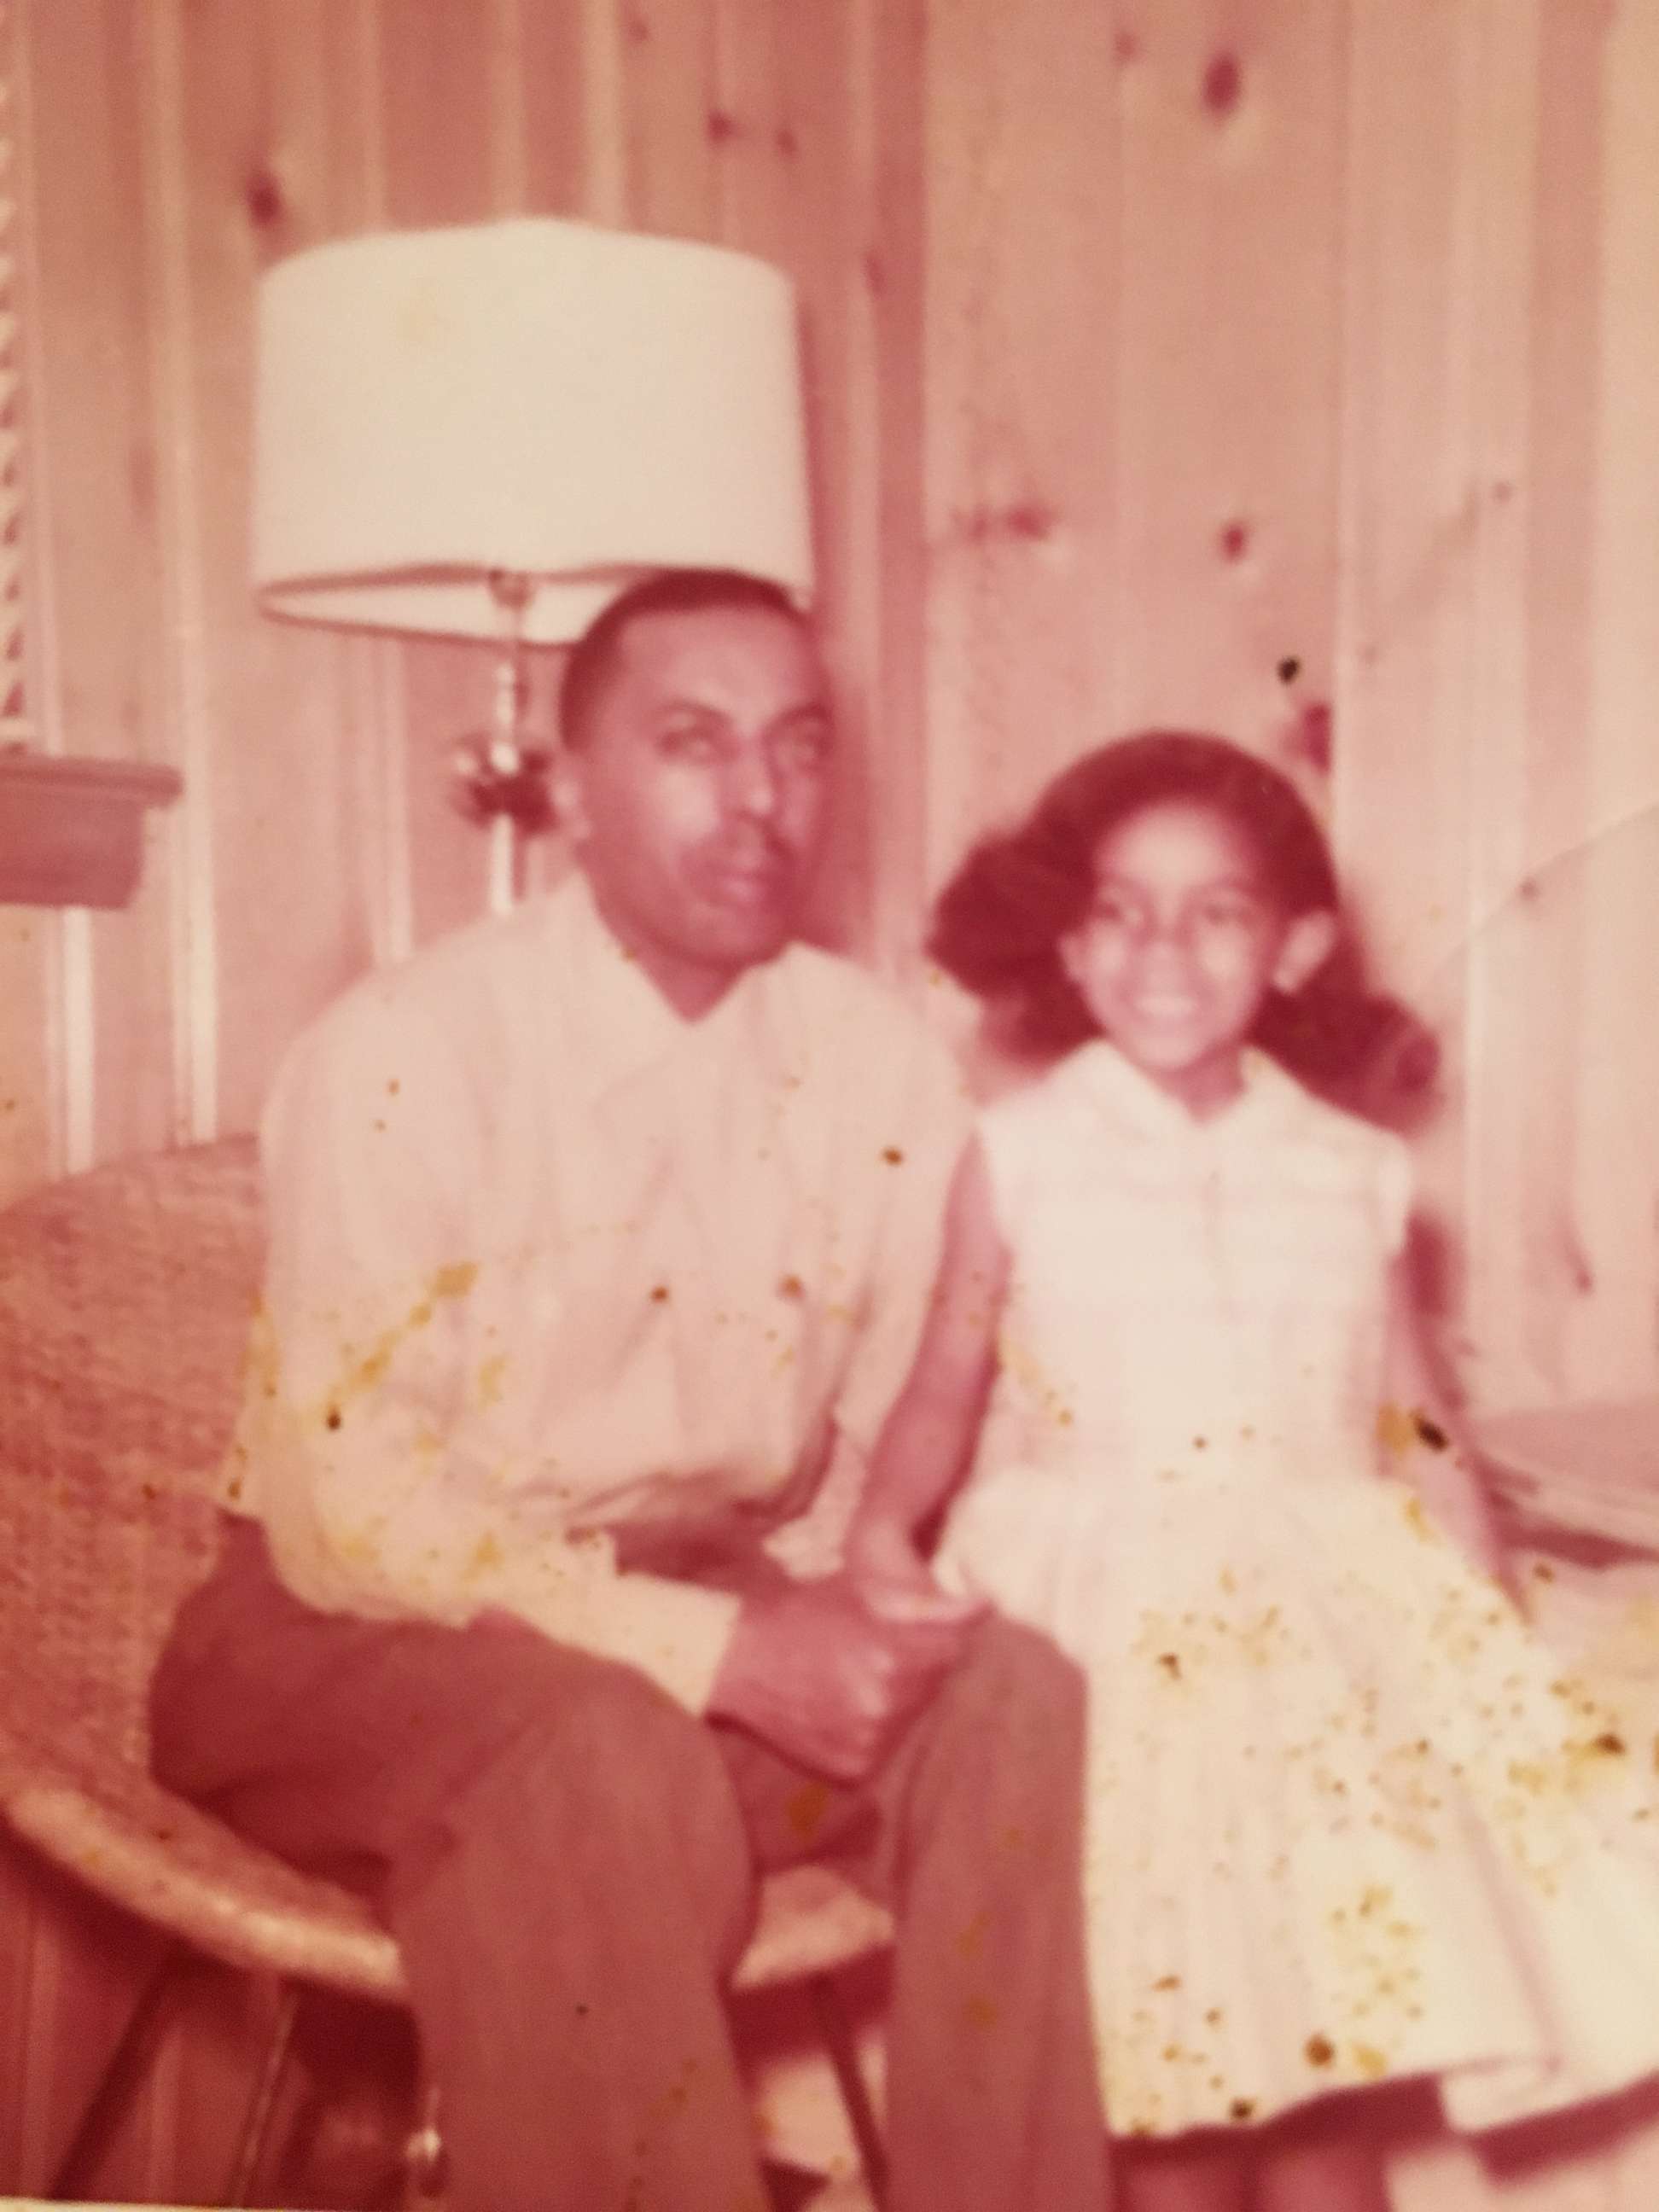 PHOTO: A throwback photo of Jacqueline Sumner with her late father, William Robinson.